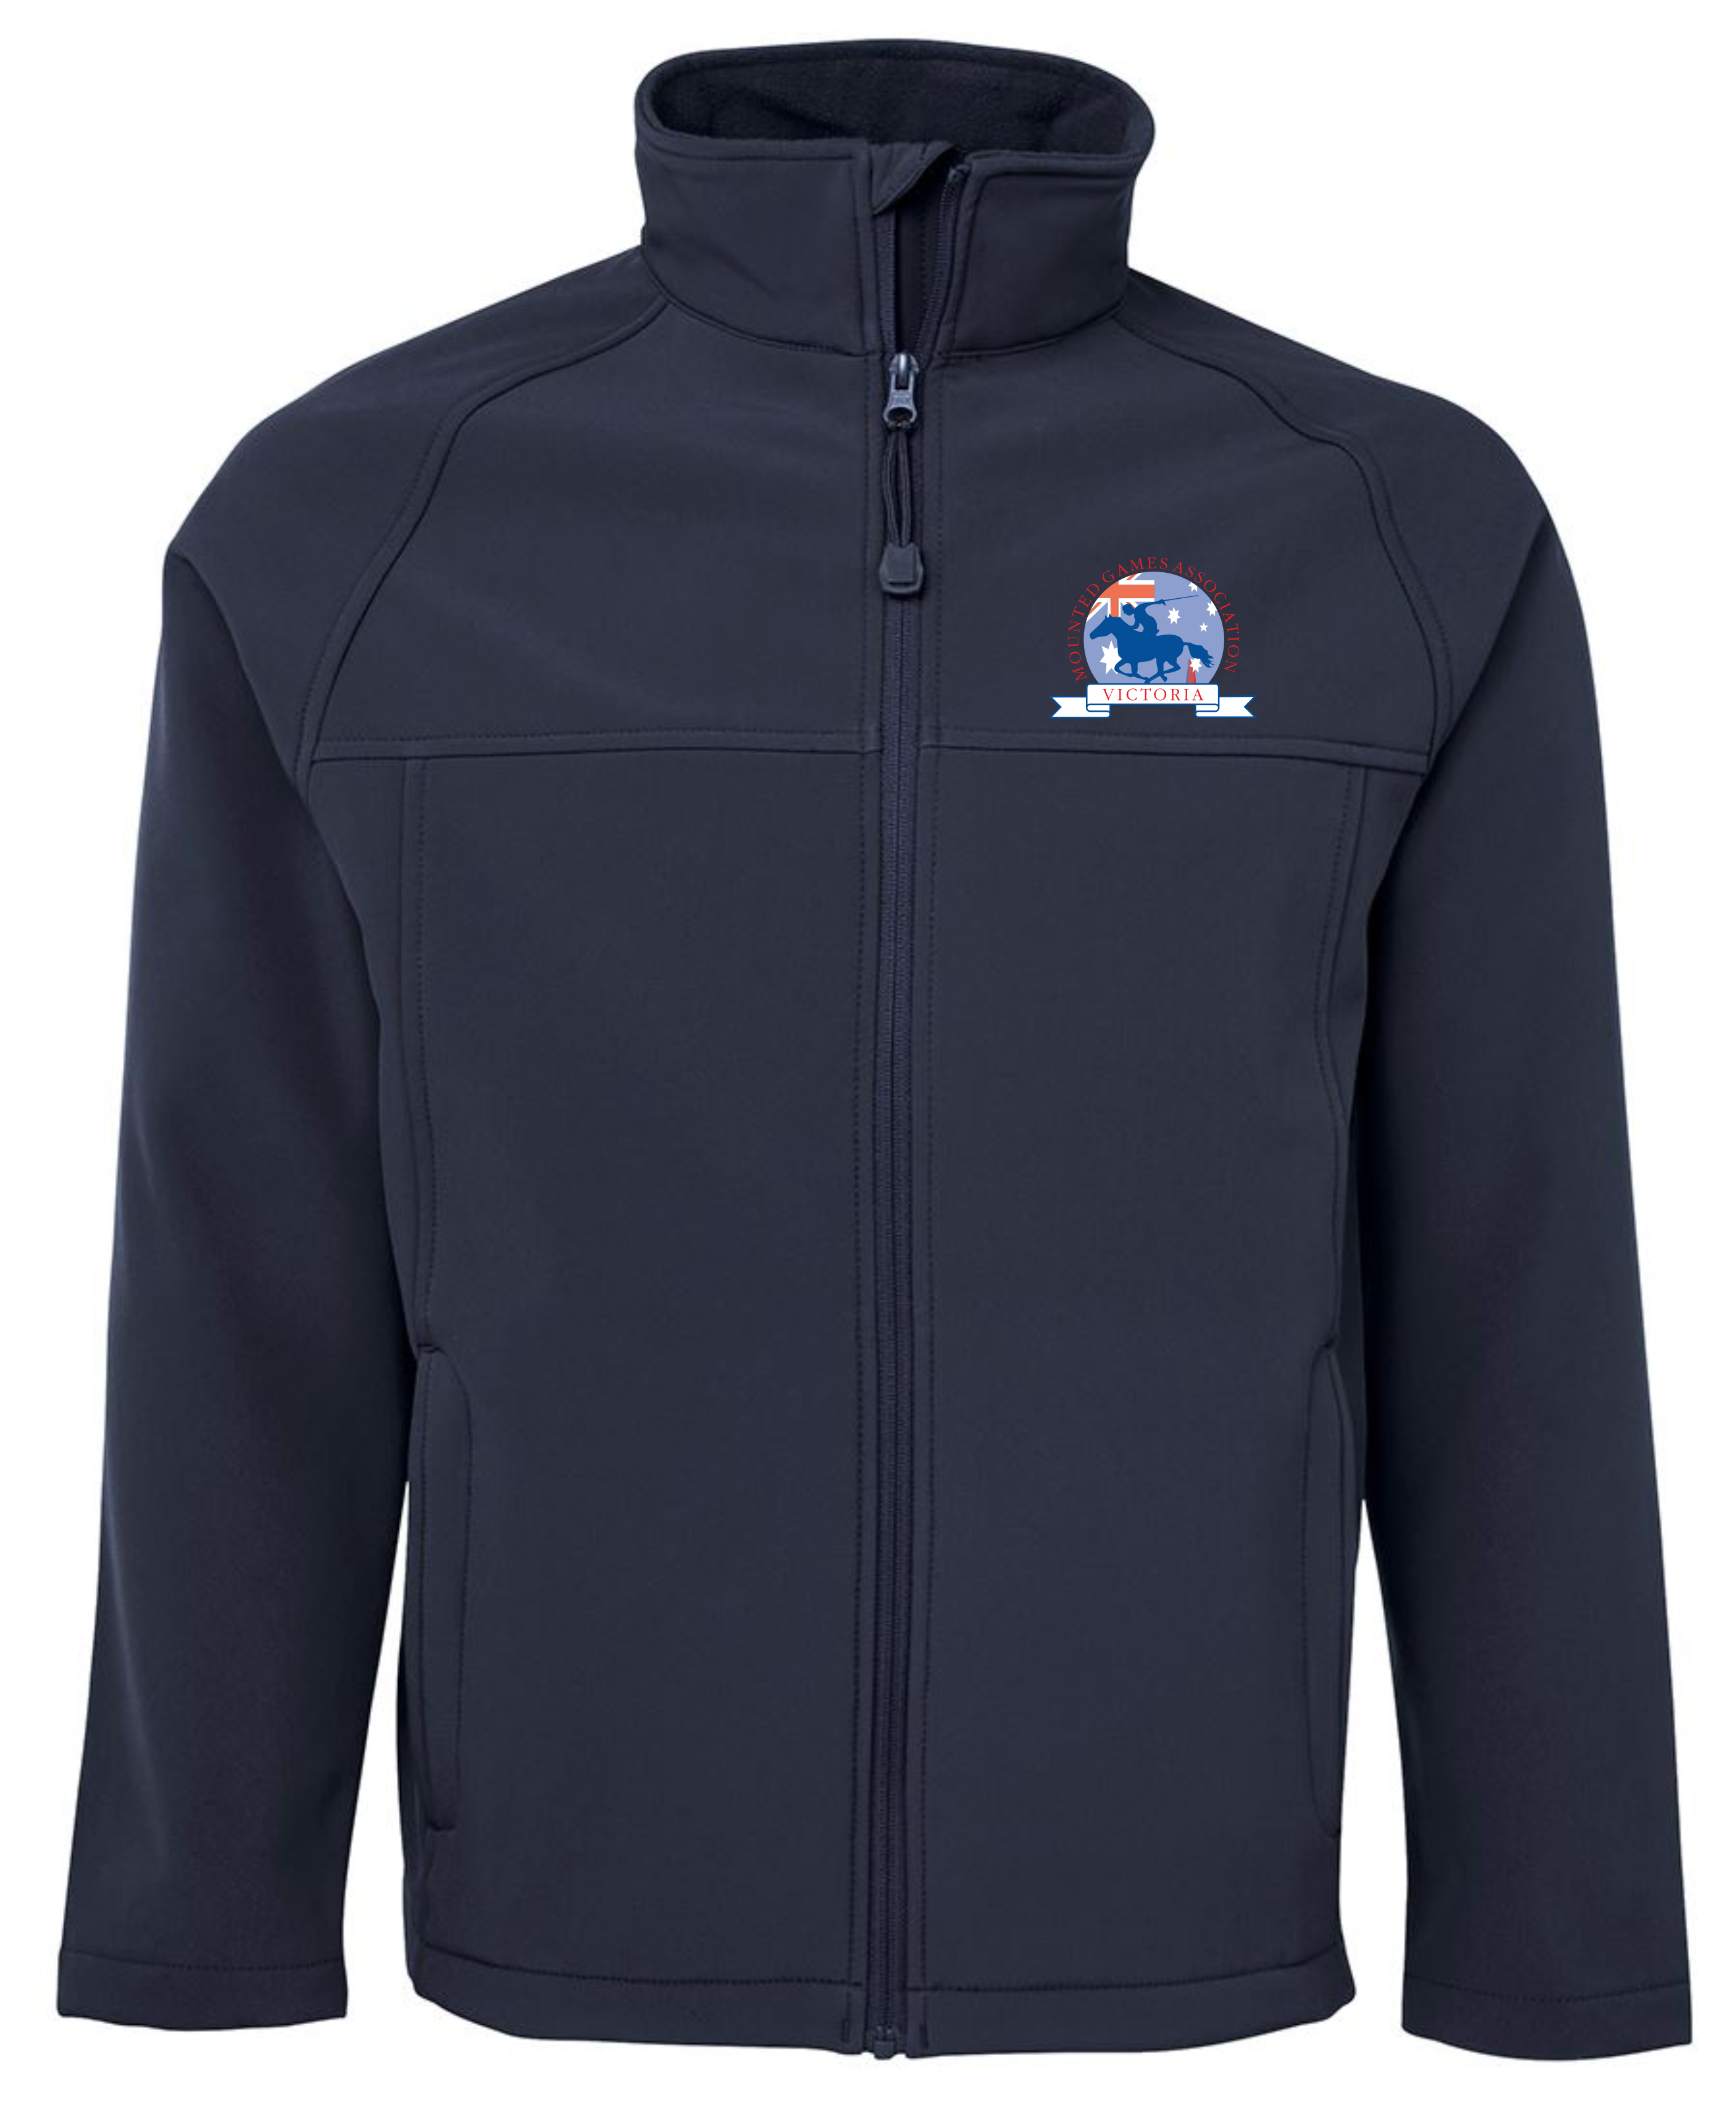 Kids & Adults Softshell Jacket in NAVY